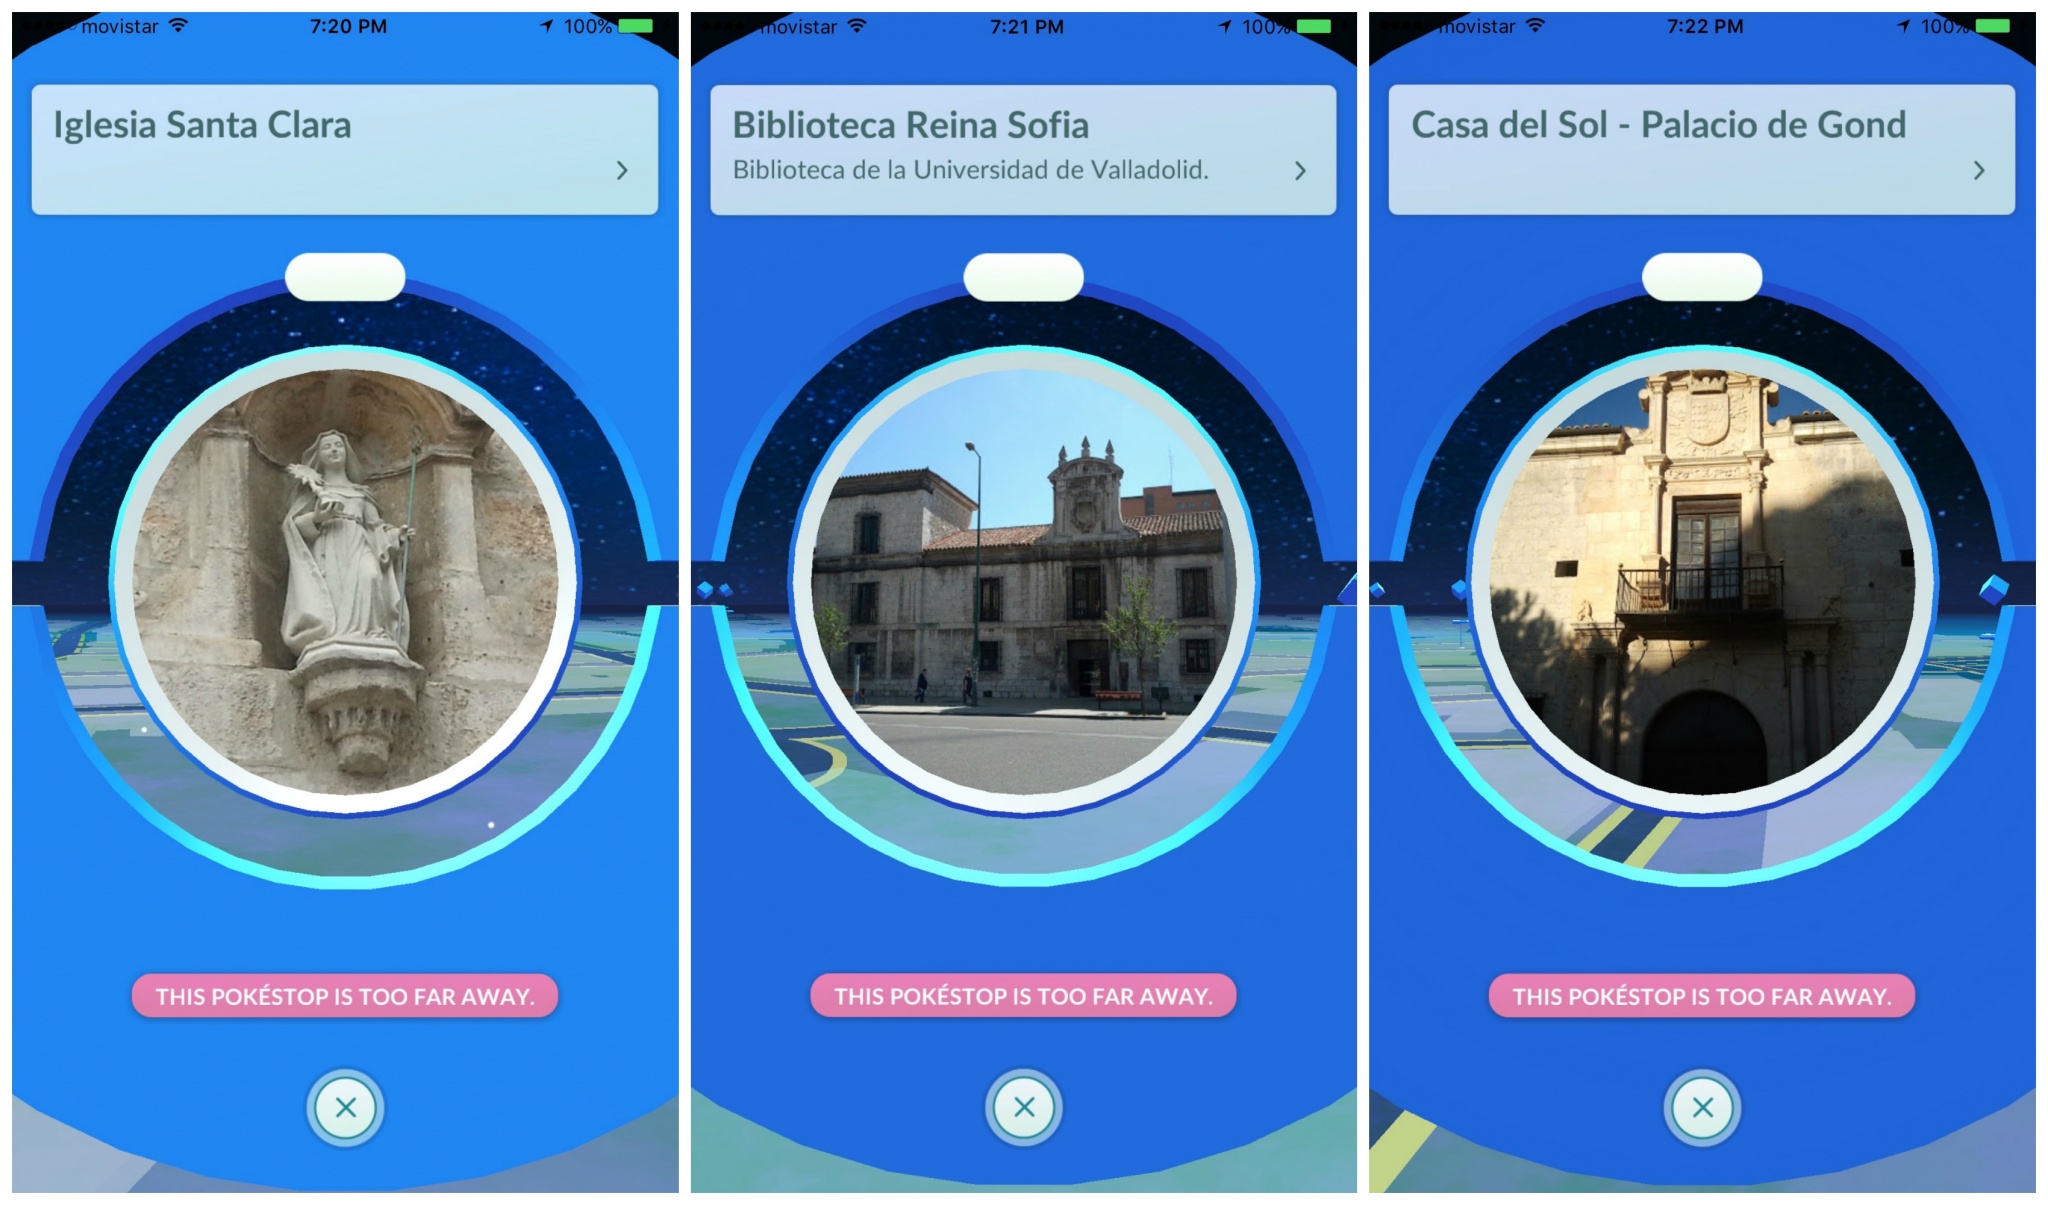 Pokestops at important monuments and buildings in Valladolid